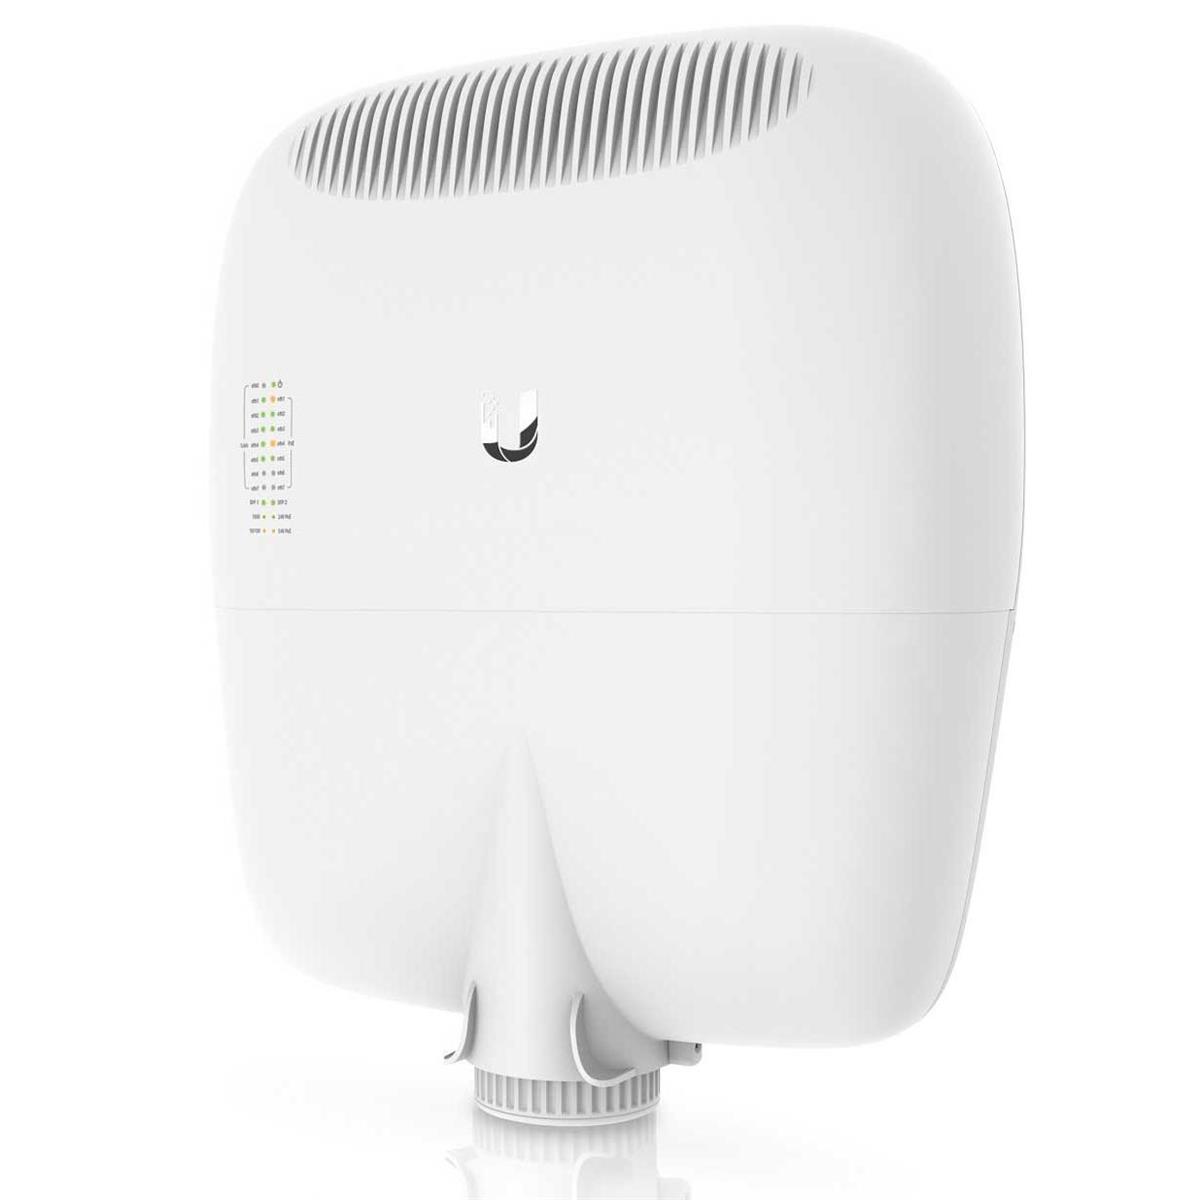 Image of Ubiquiti Networks EP-R8 EdgePoint WISP Gigabit Router